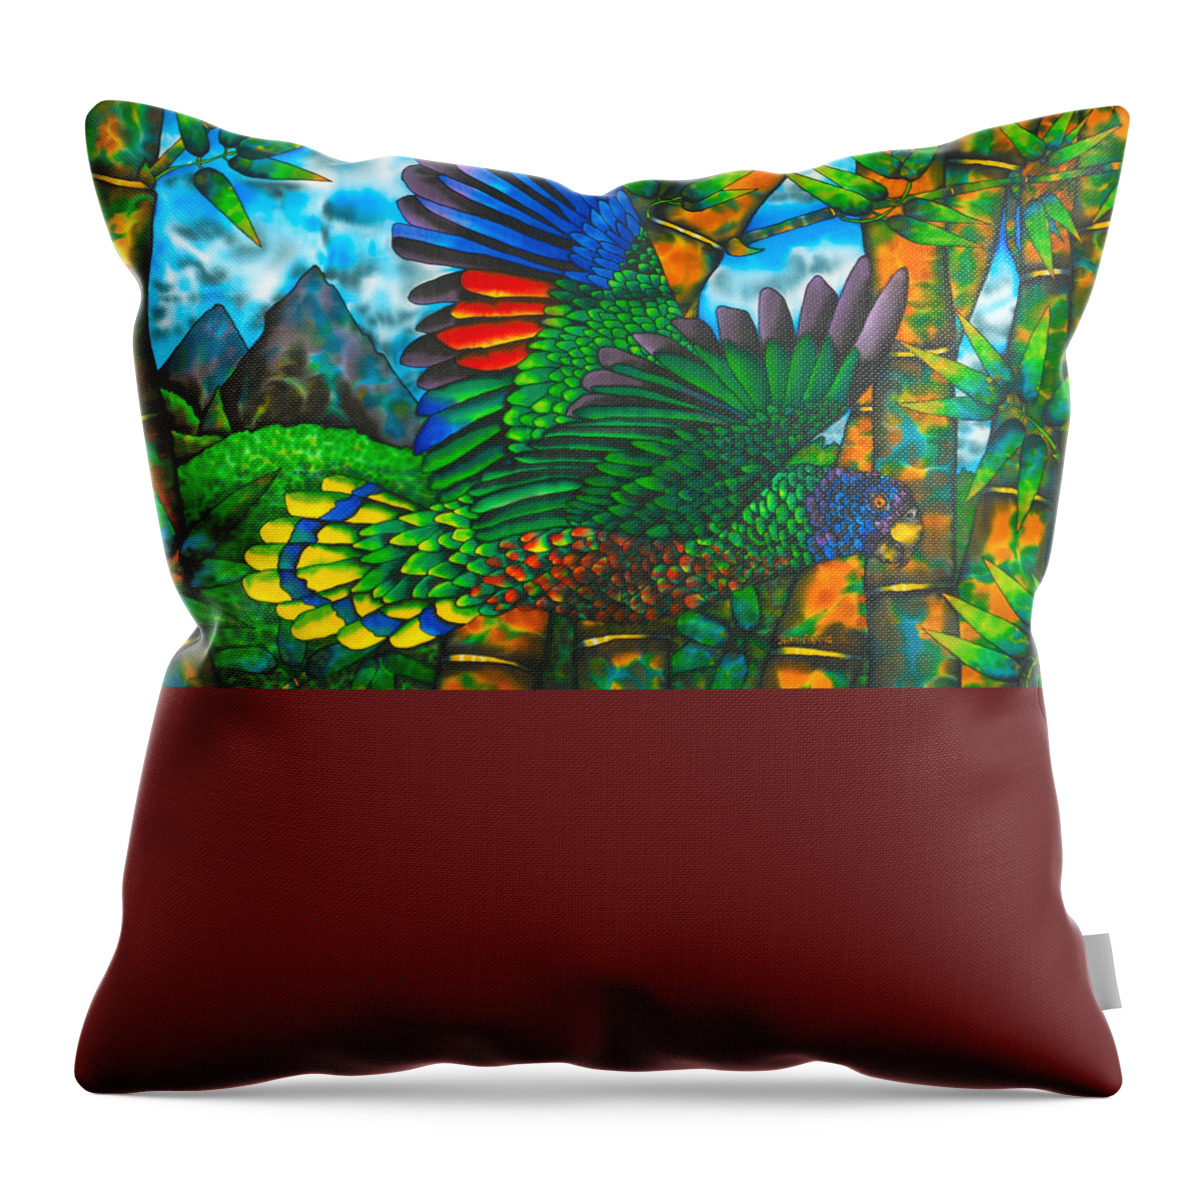 St. Lucia Parrot Throw Pillow featuring the painting Gwi Gwi St. Lucia Amazon Parrot - Exotic Bird by Daniel Jean-Baptiste